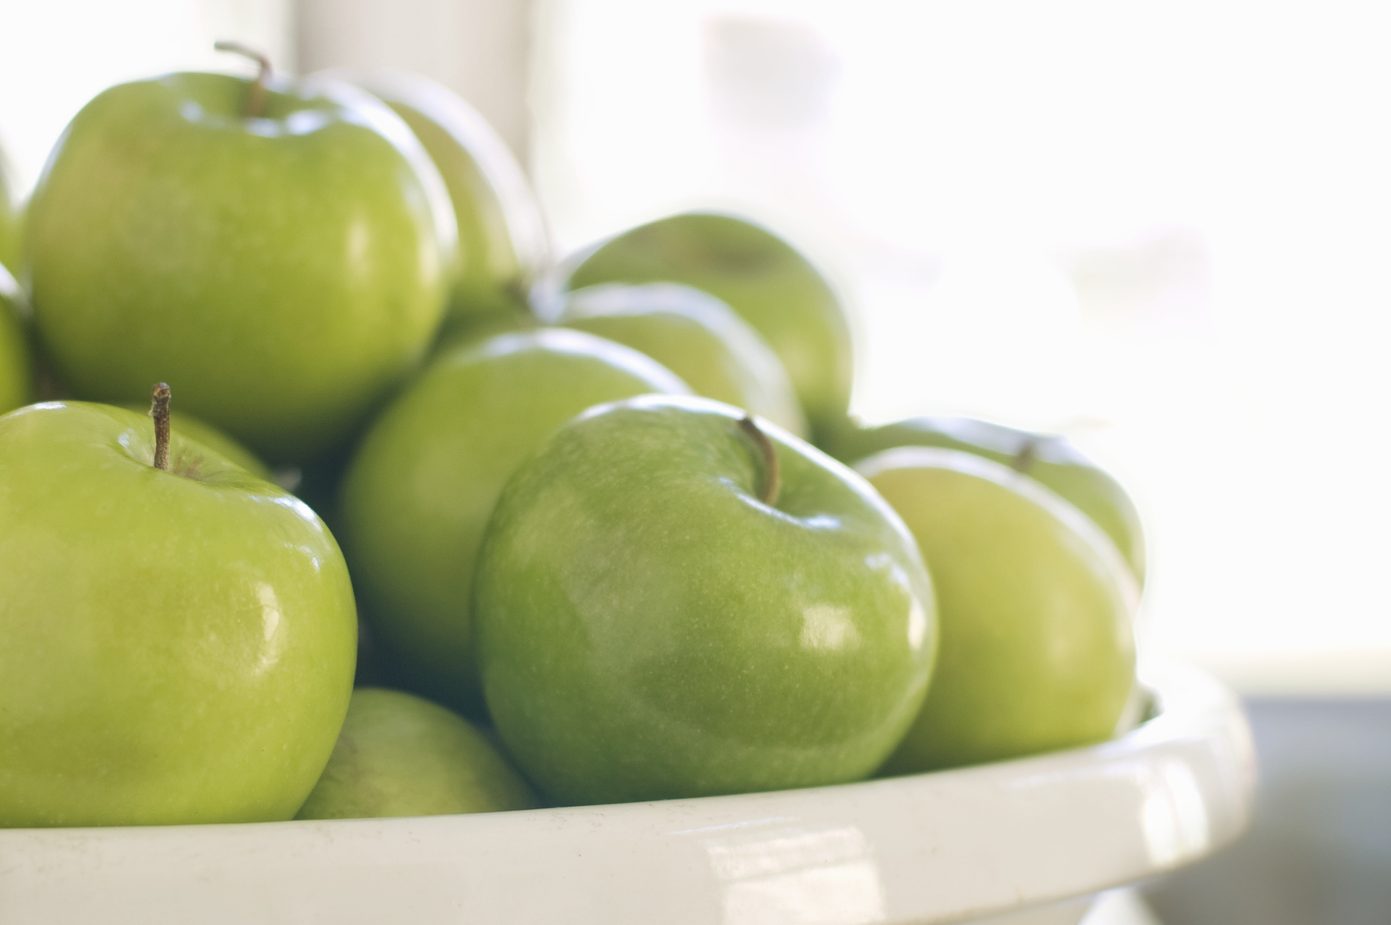 Large Granny Smith Apple - Each, Large/ 1 Count - Food 4 Less